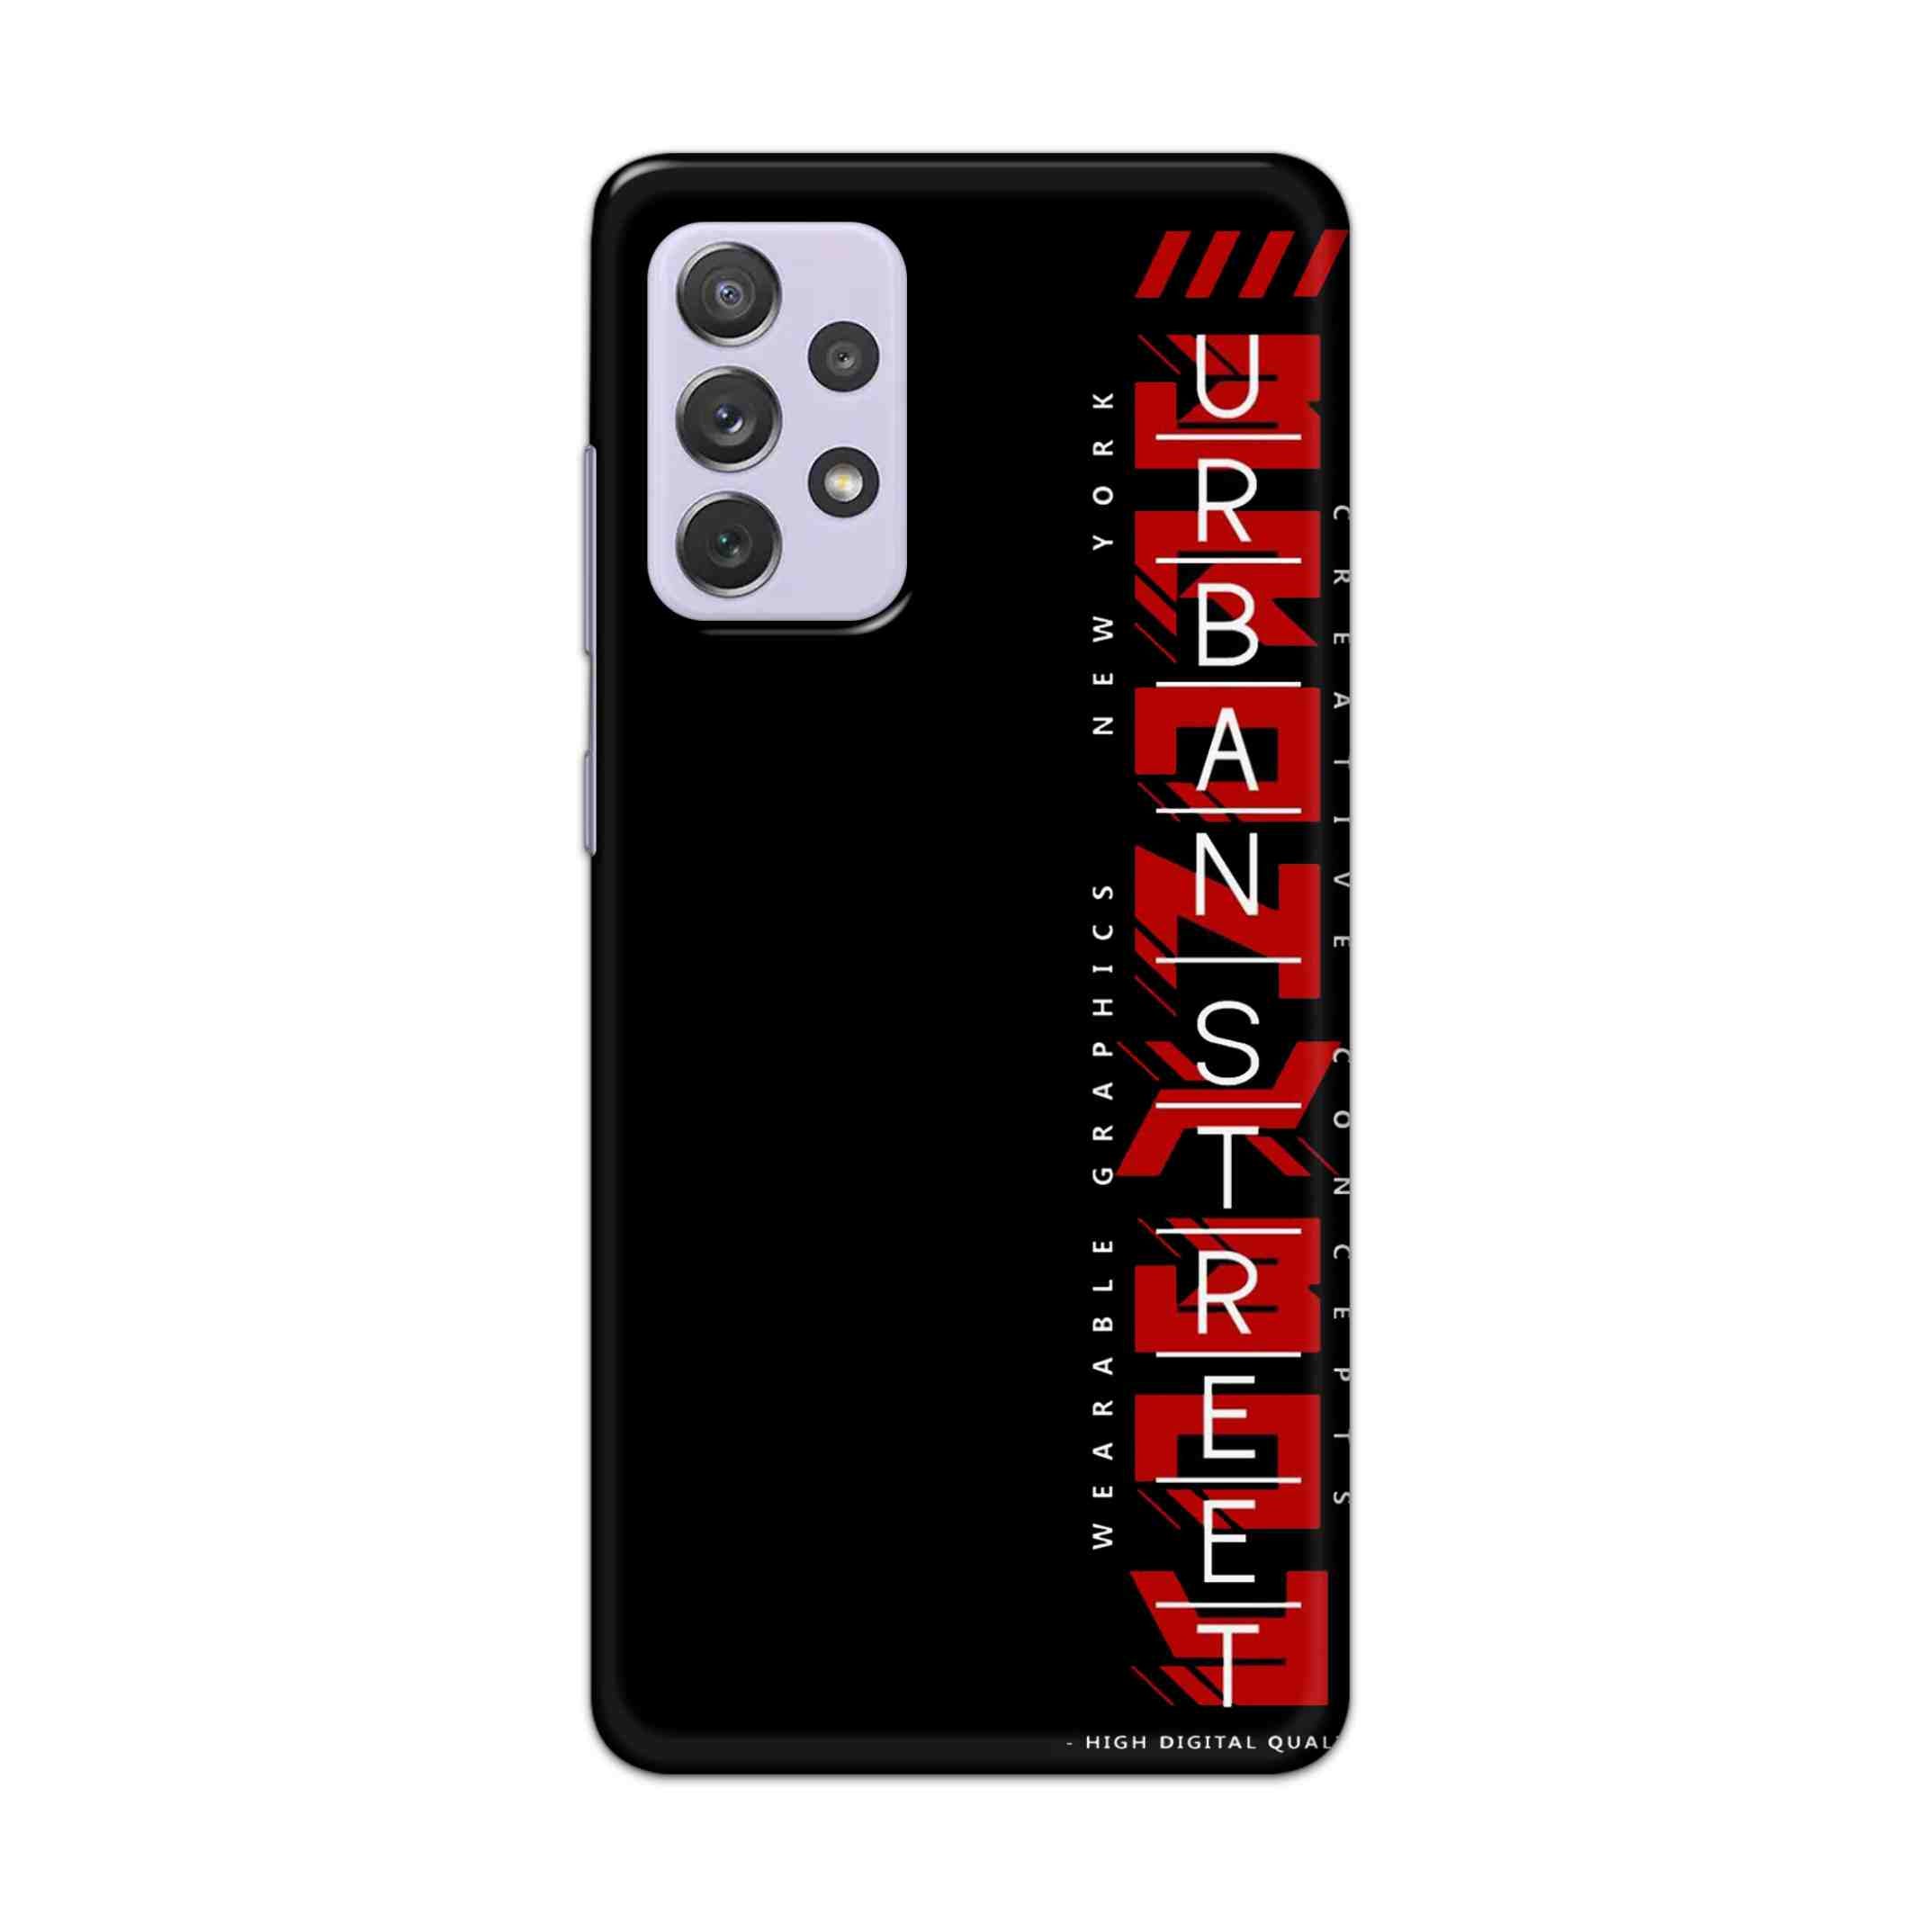 Buy Urban Street Hard Back Mobile Phone Case Cover For Samsung Galaxy A72 Online